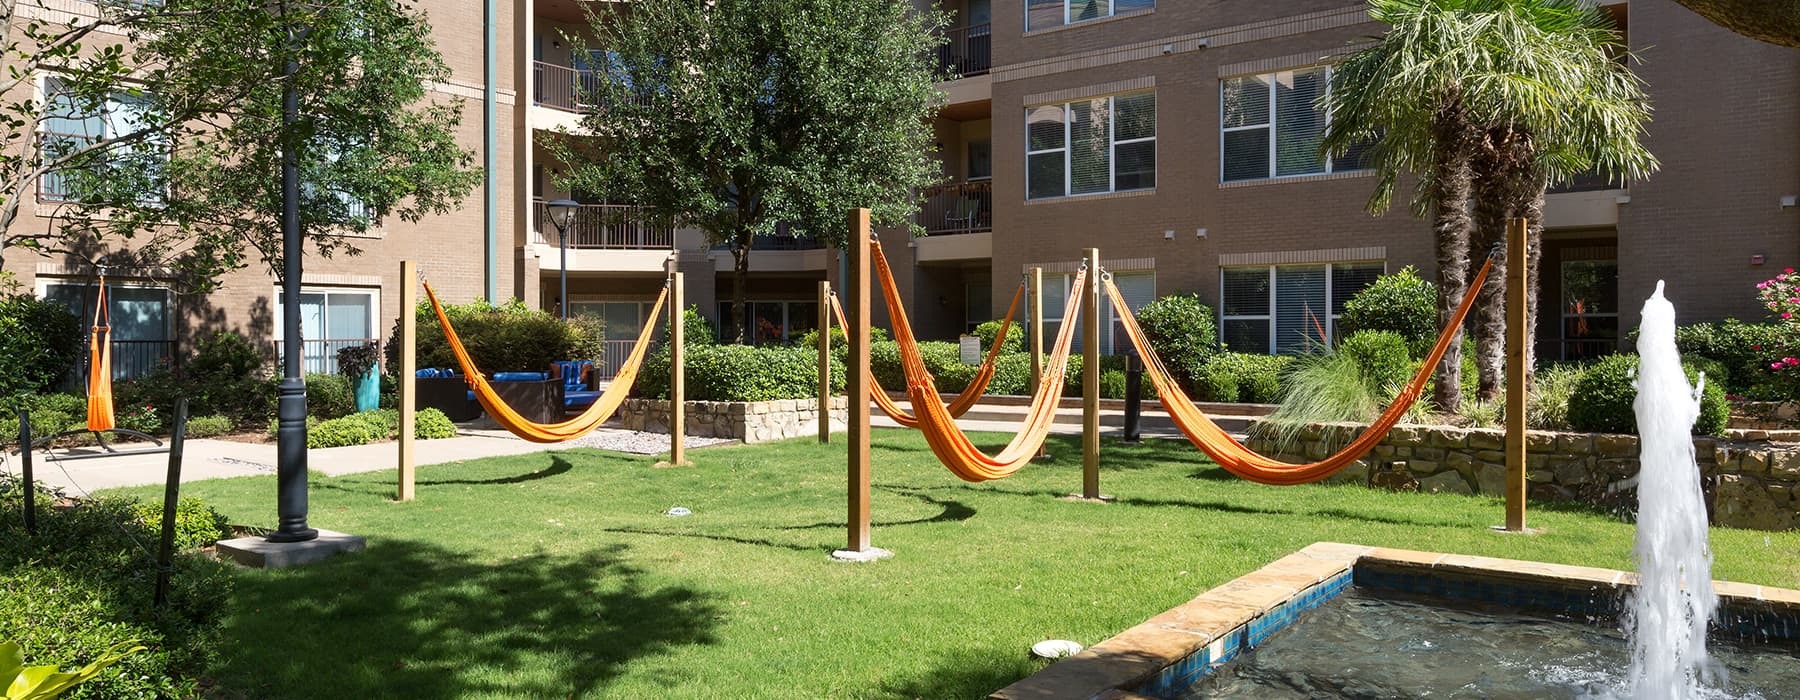 Outdoor turf with hammocks, a fountain, and nearness to pool